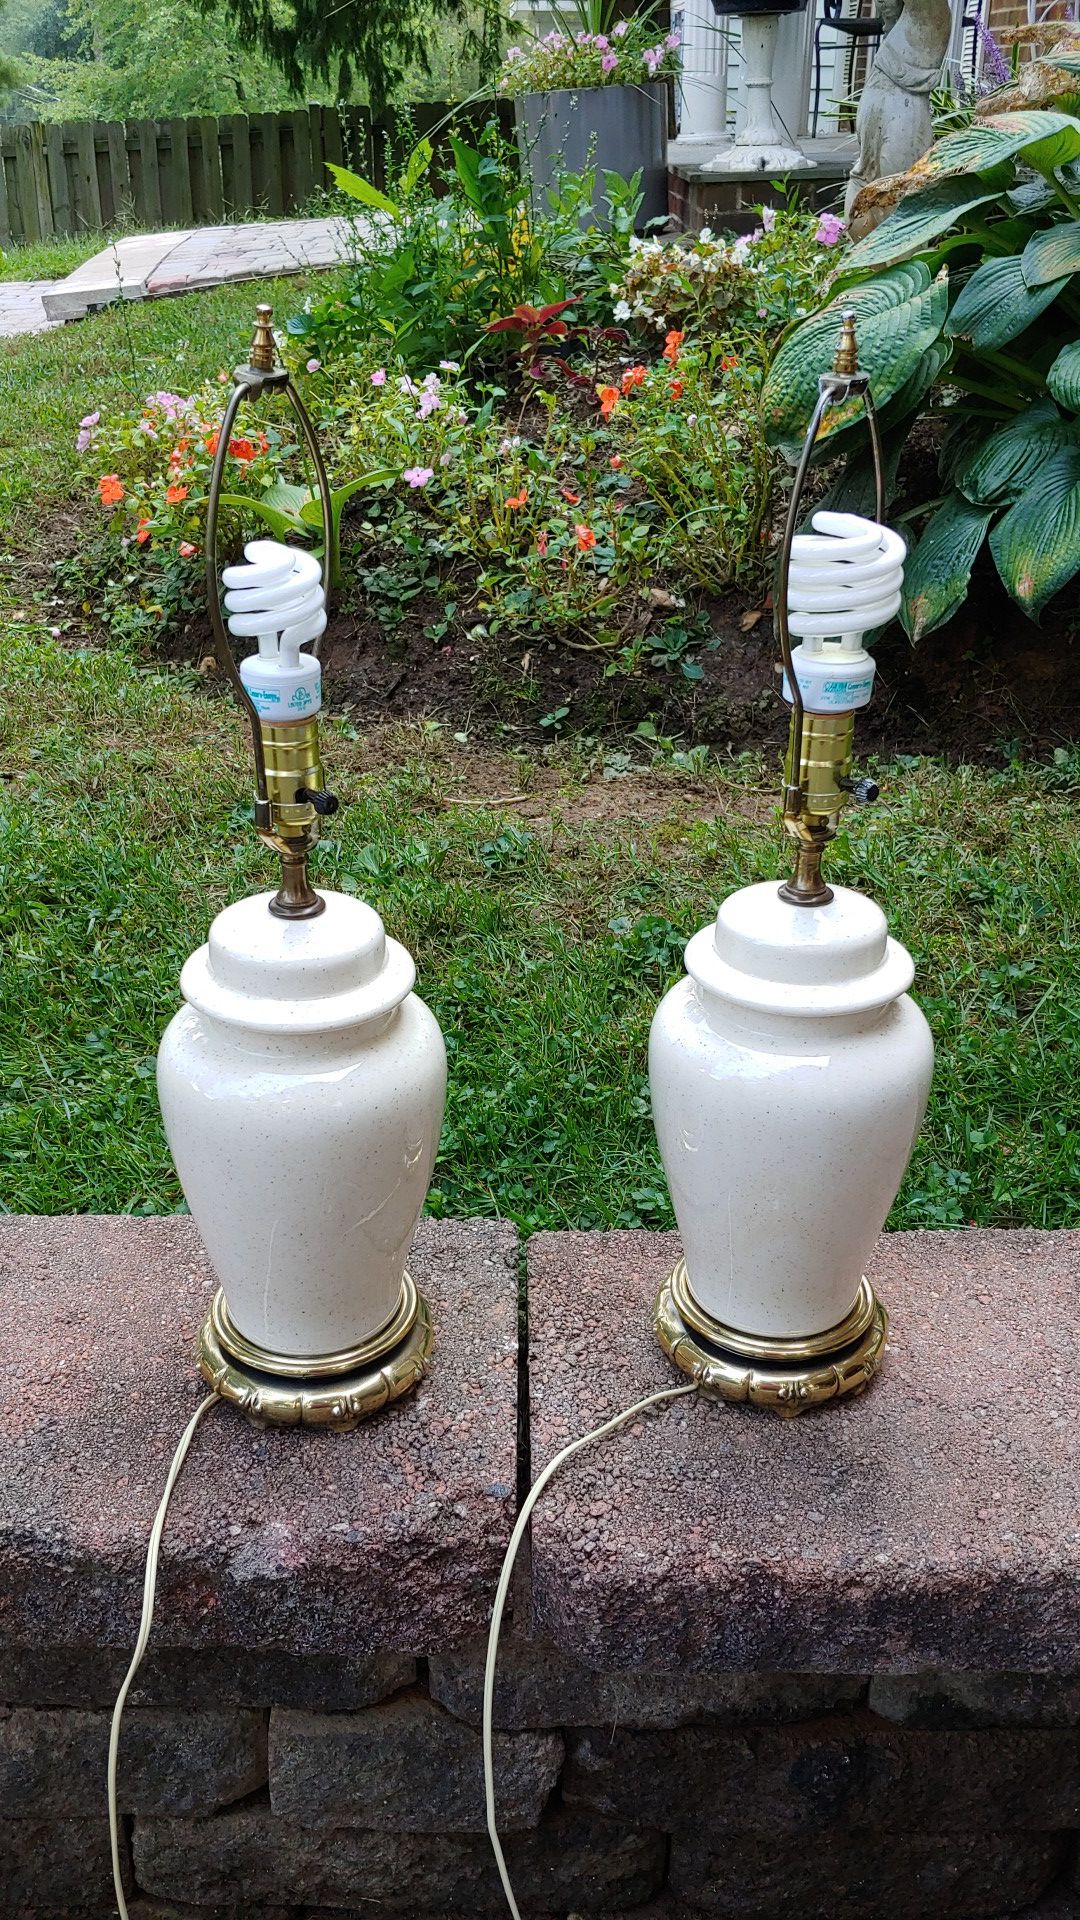 Both working lamps